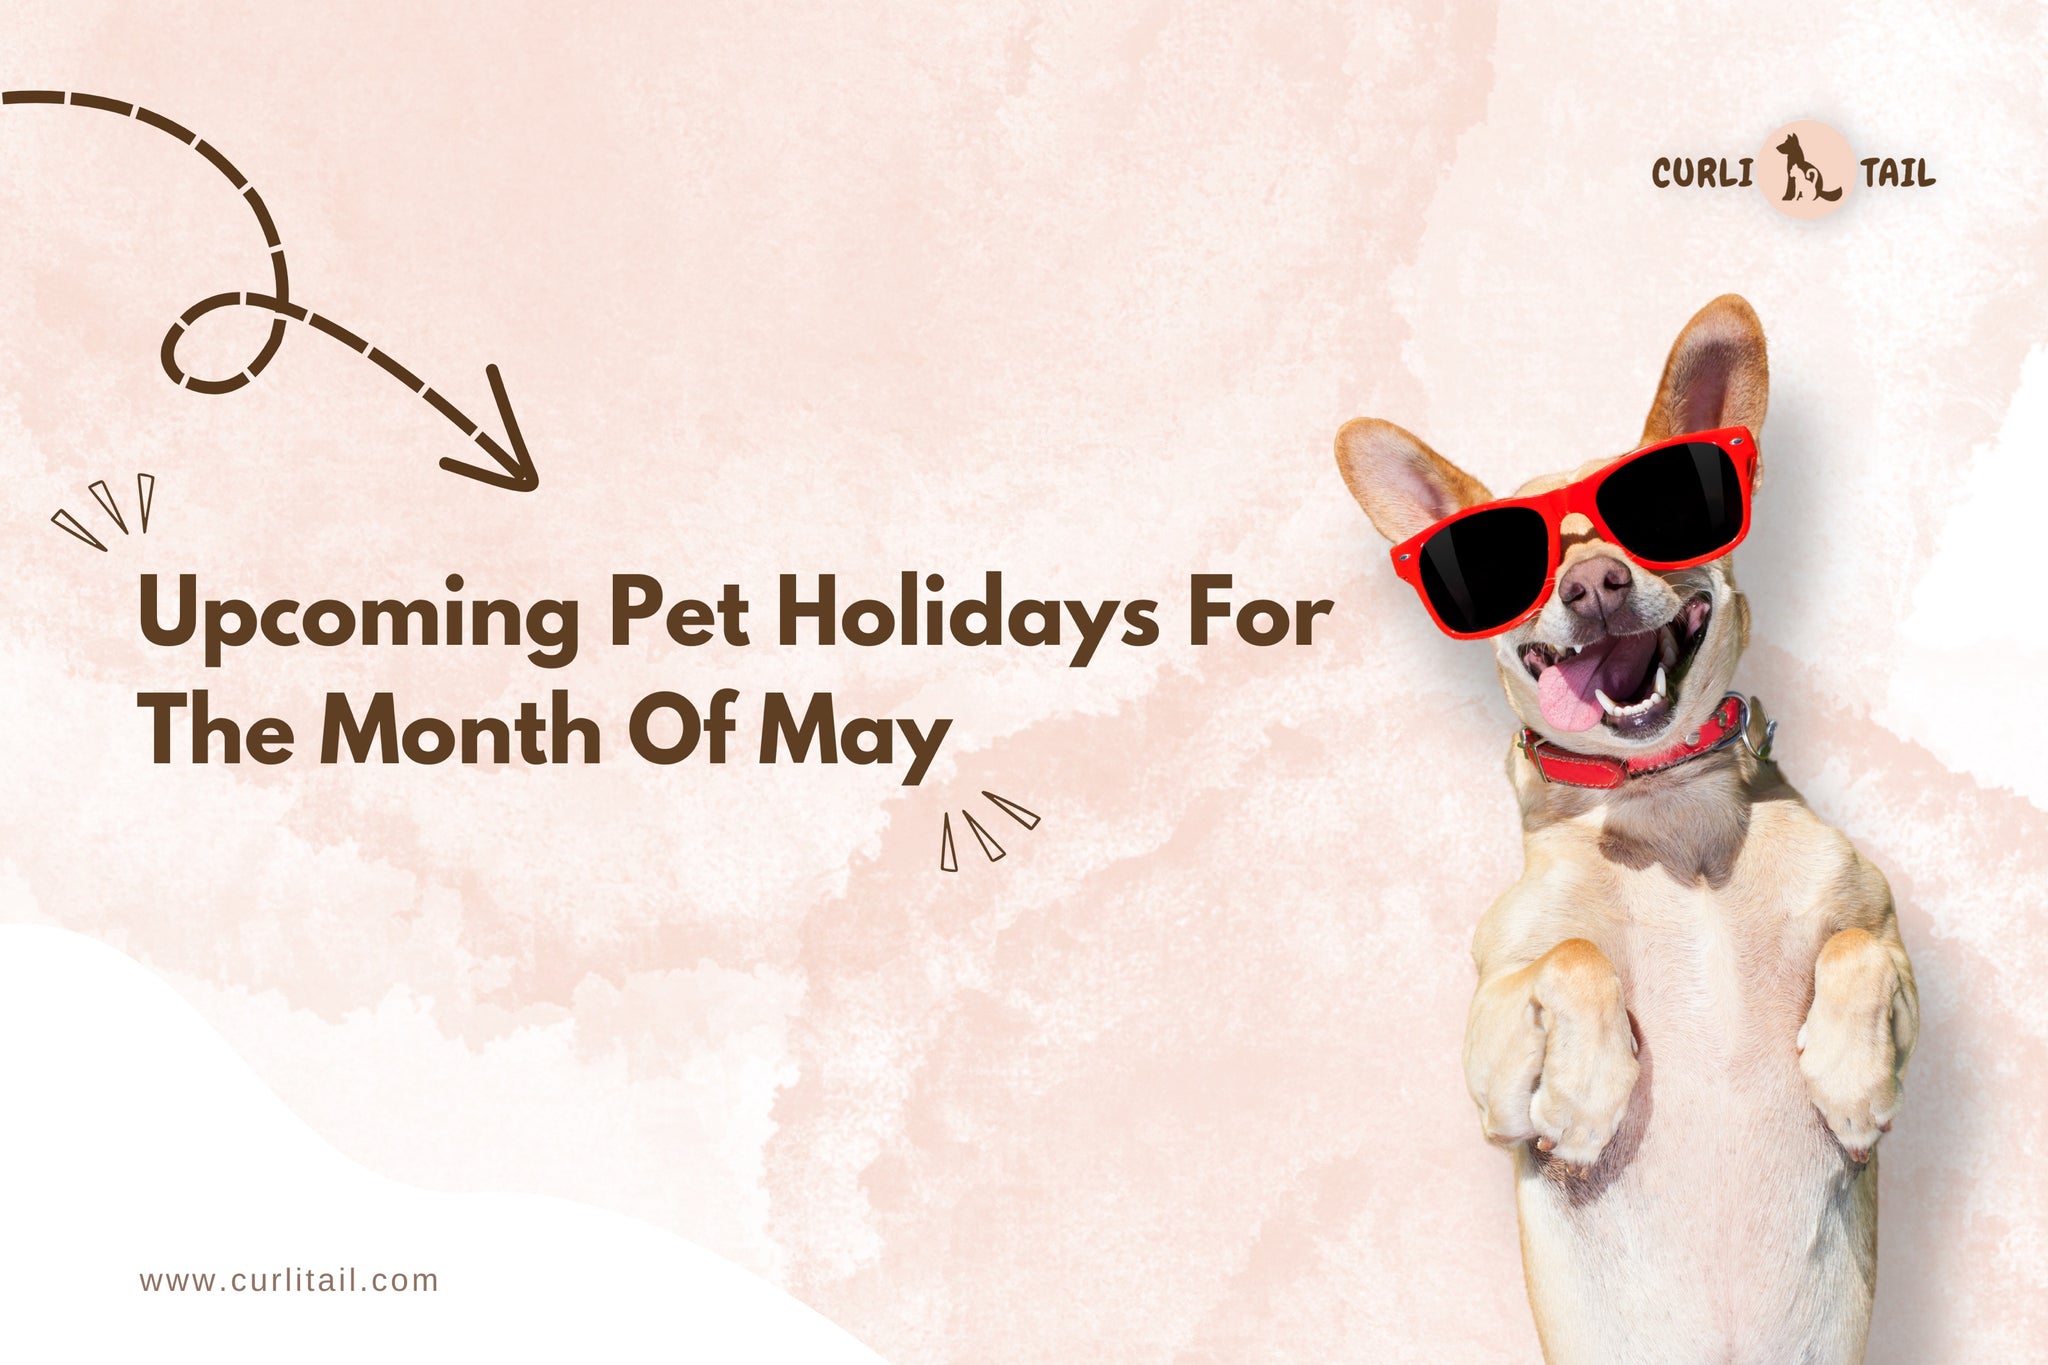 Pet holidays for May